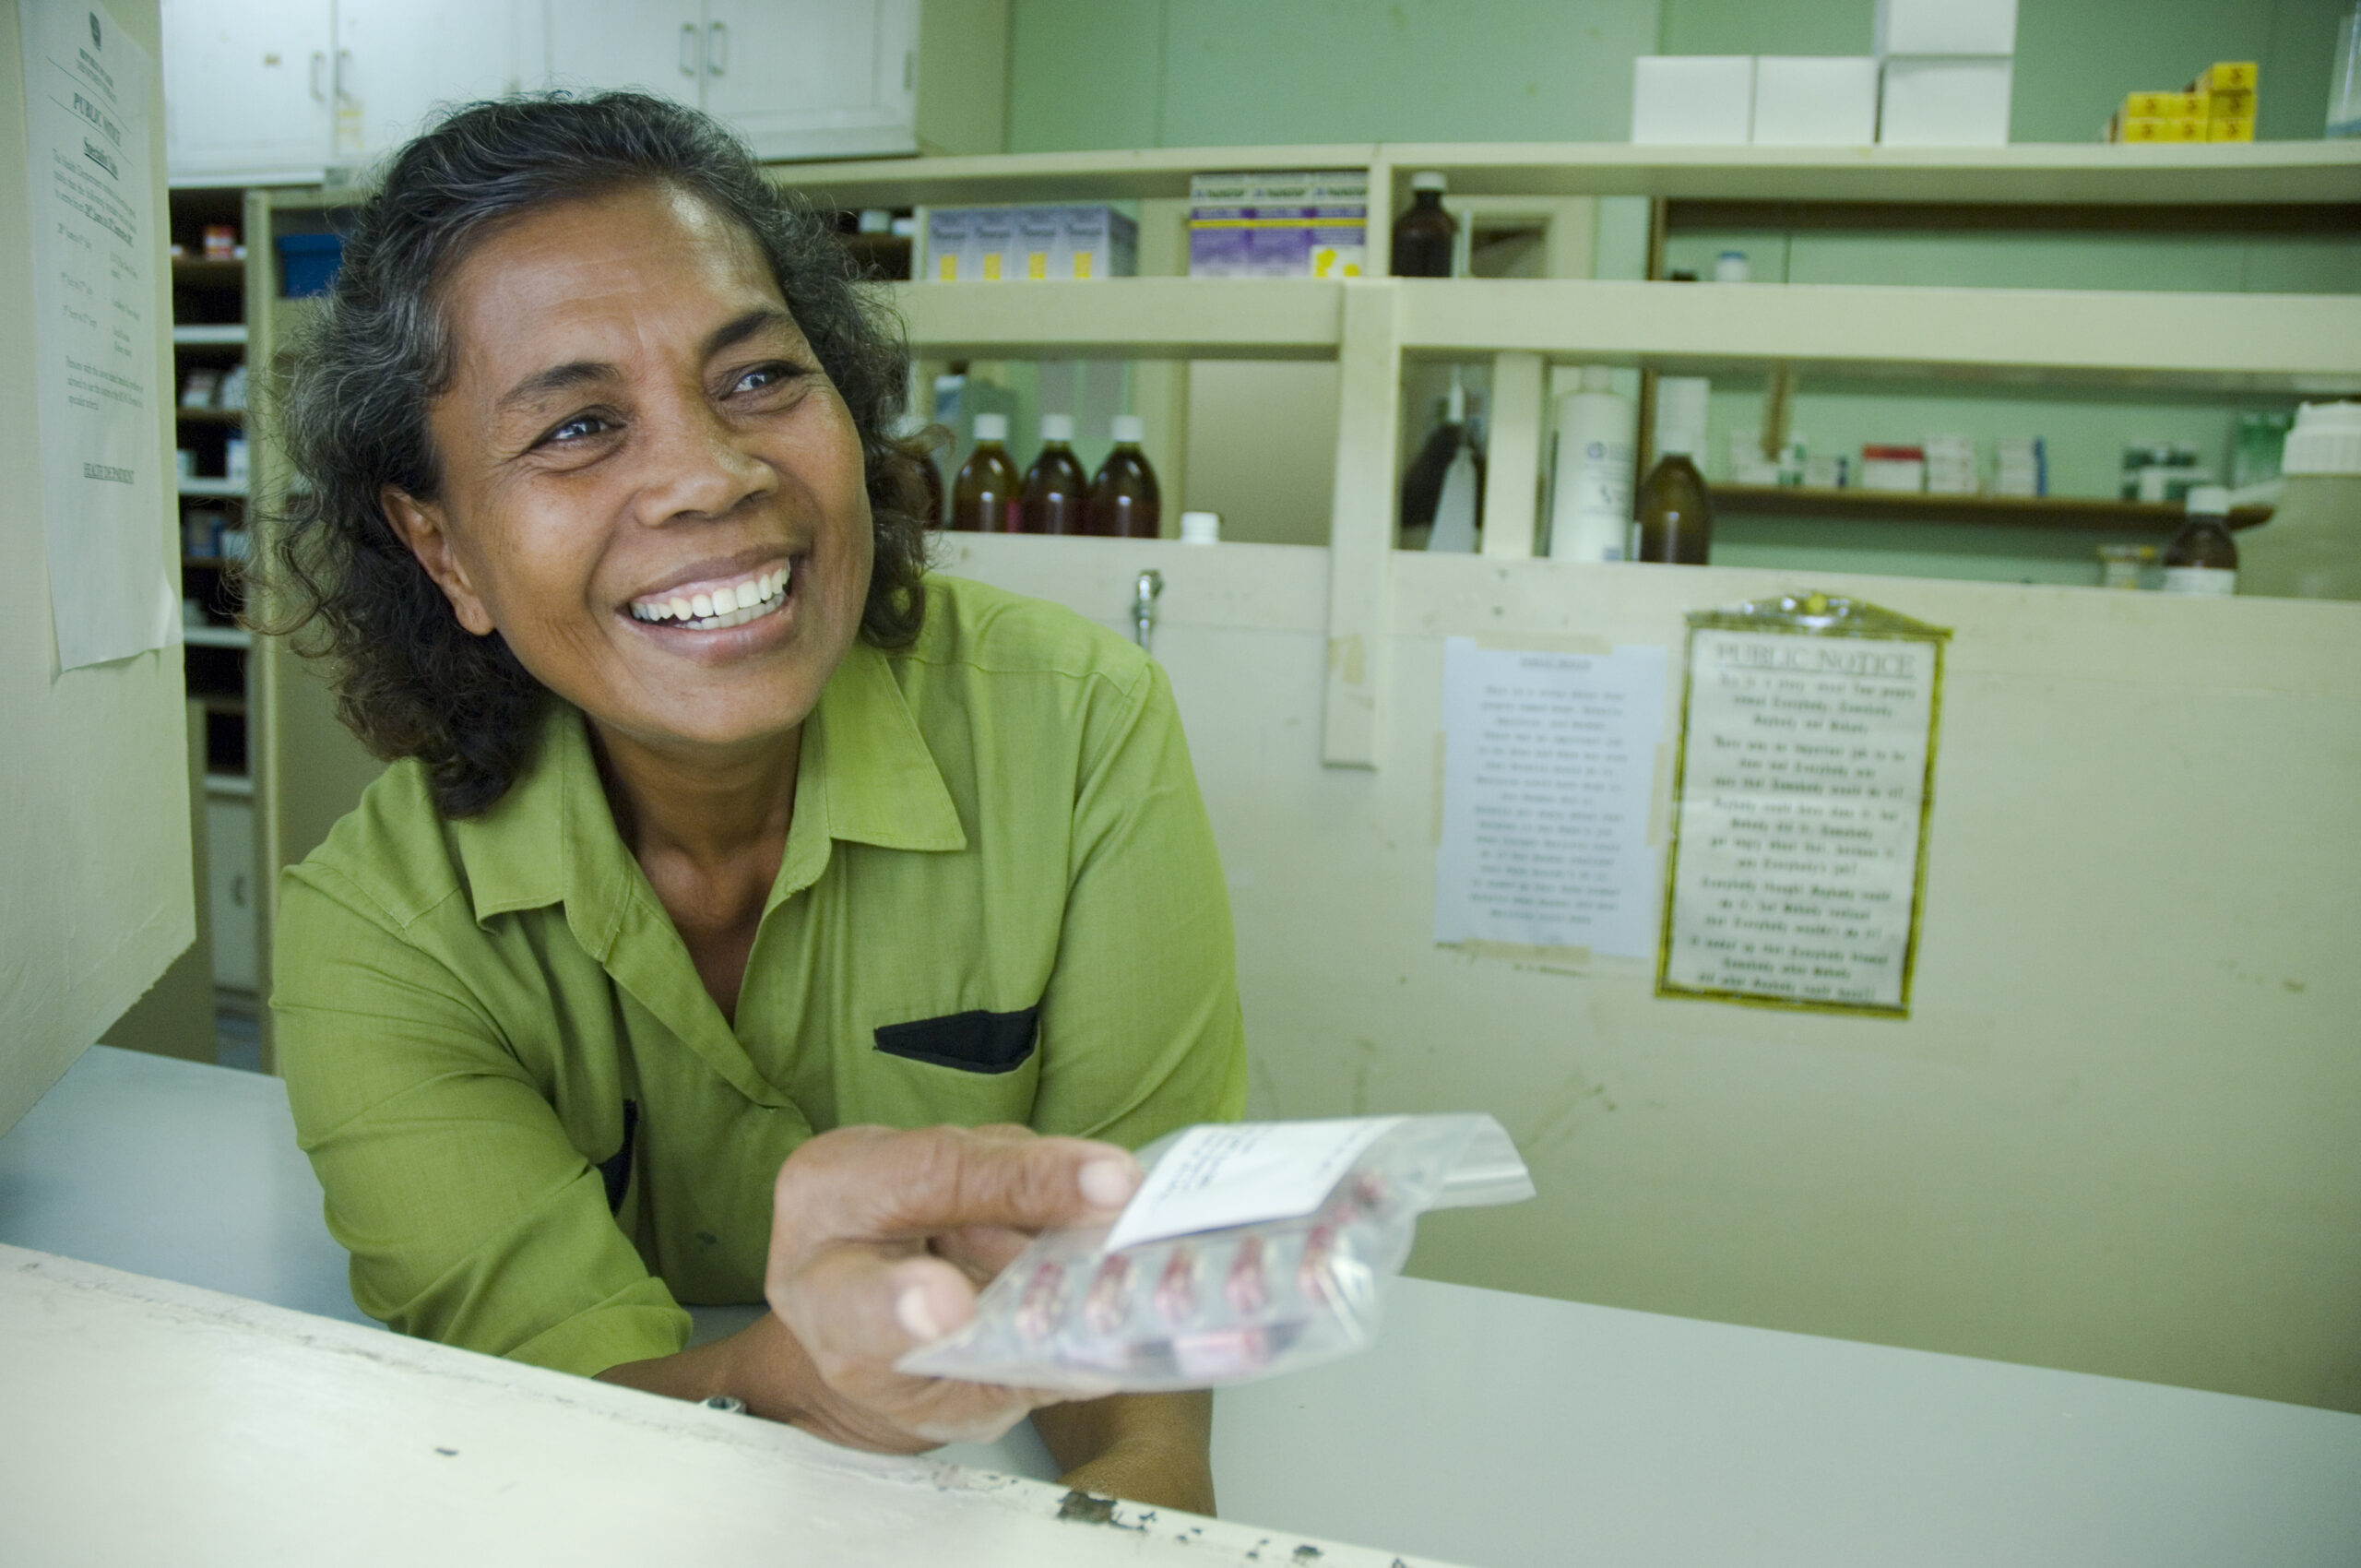 A smiling woman in a green shirt hands out medication at a pharmacy.